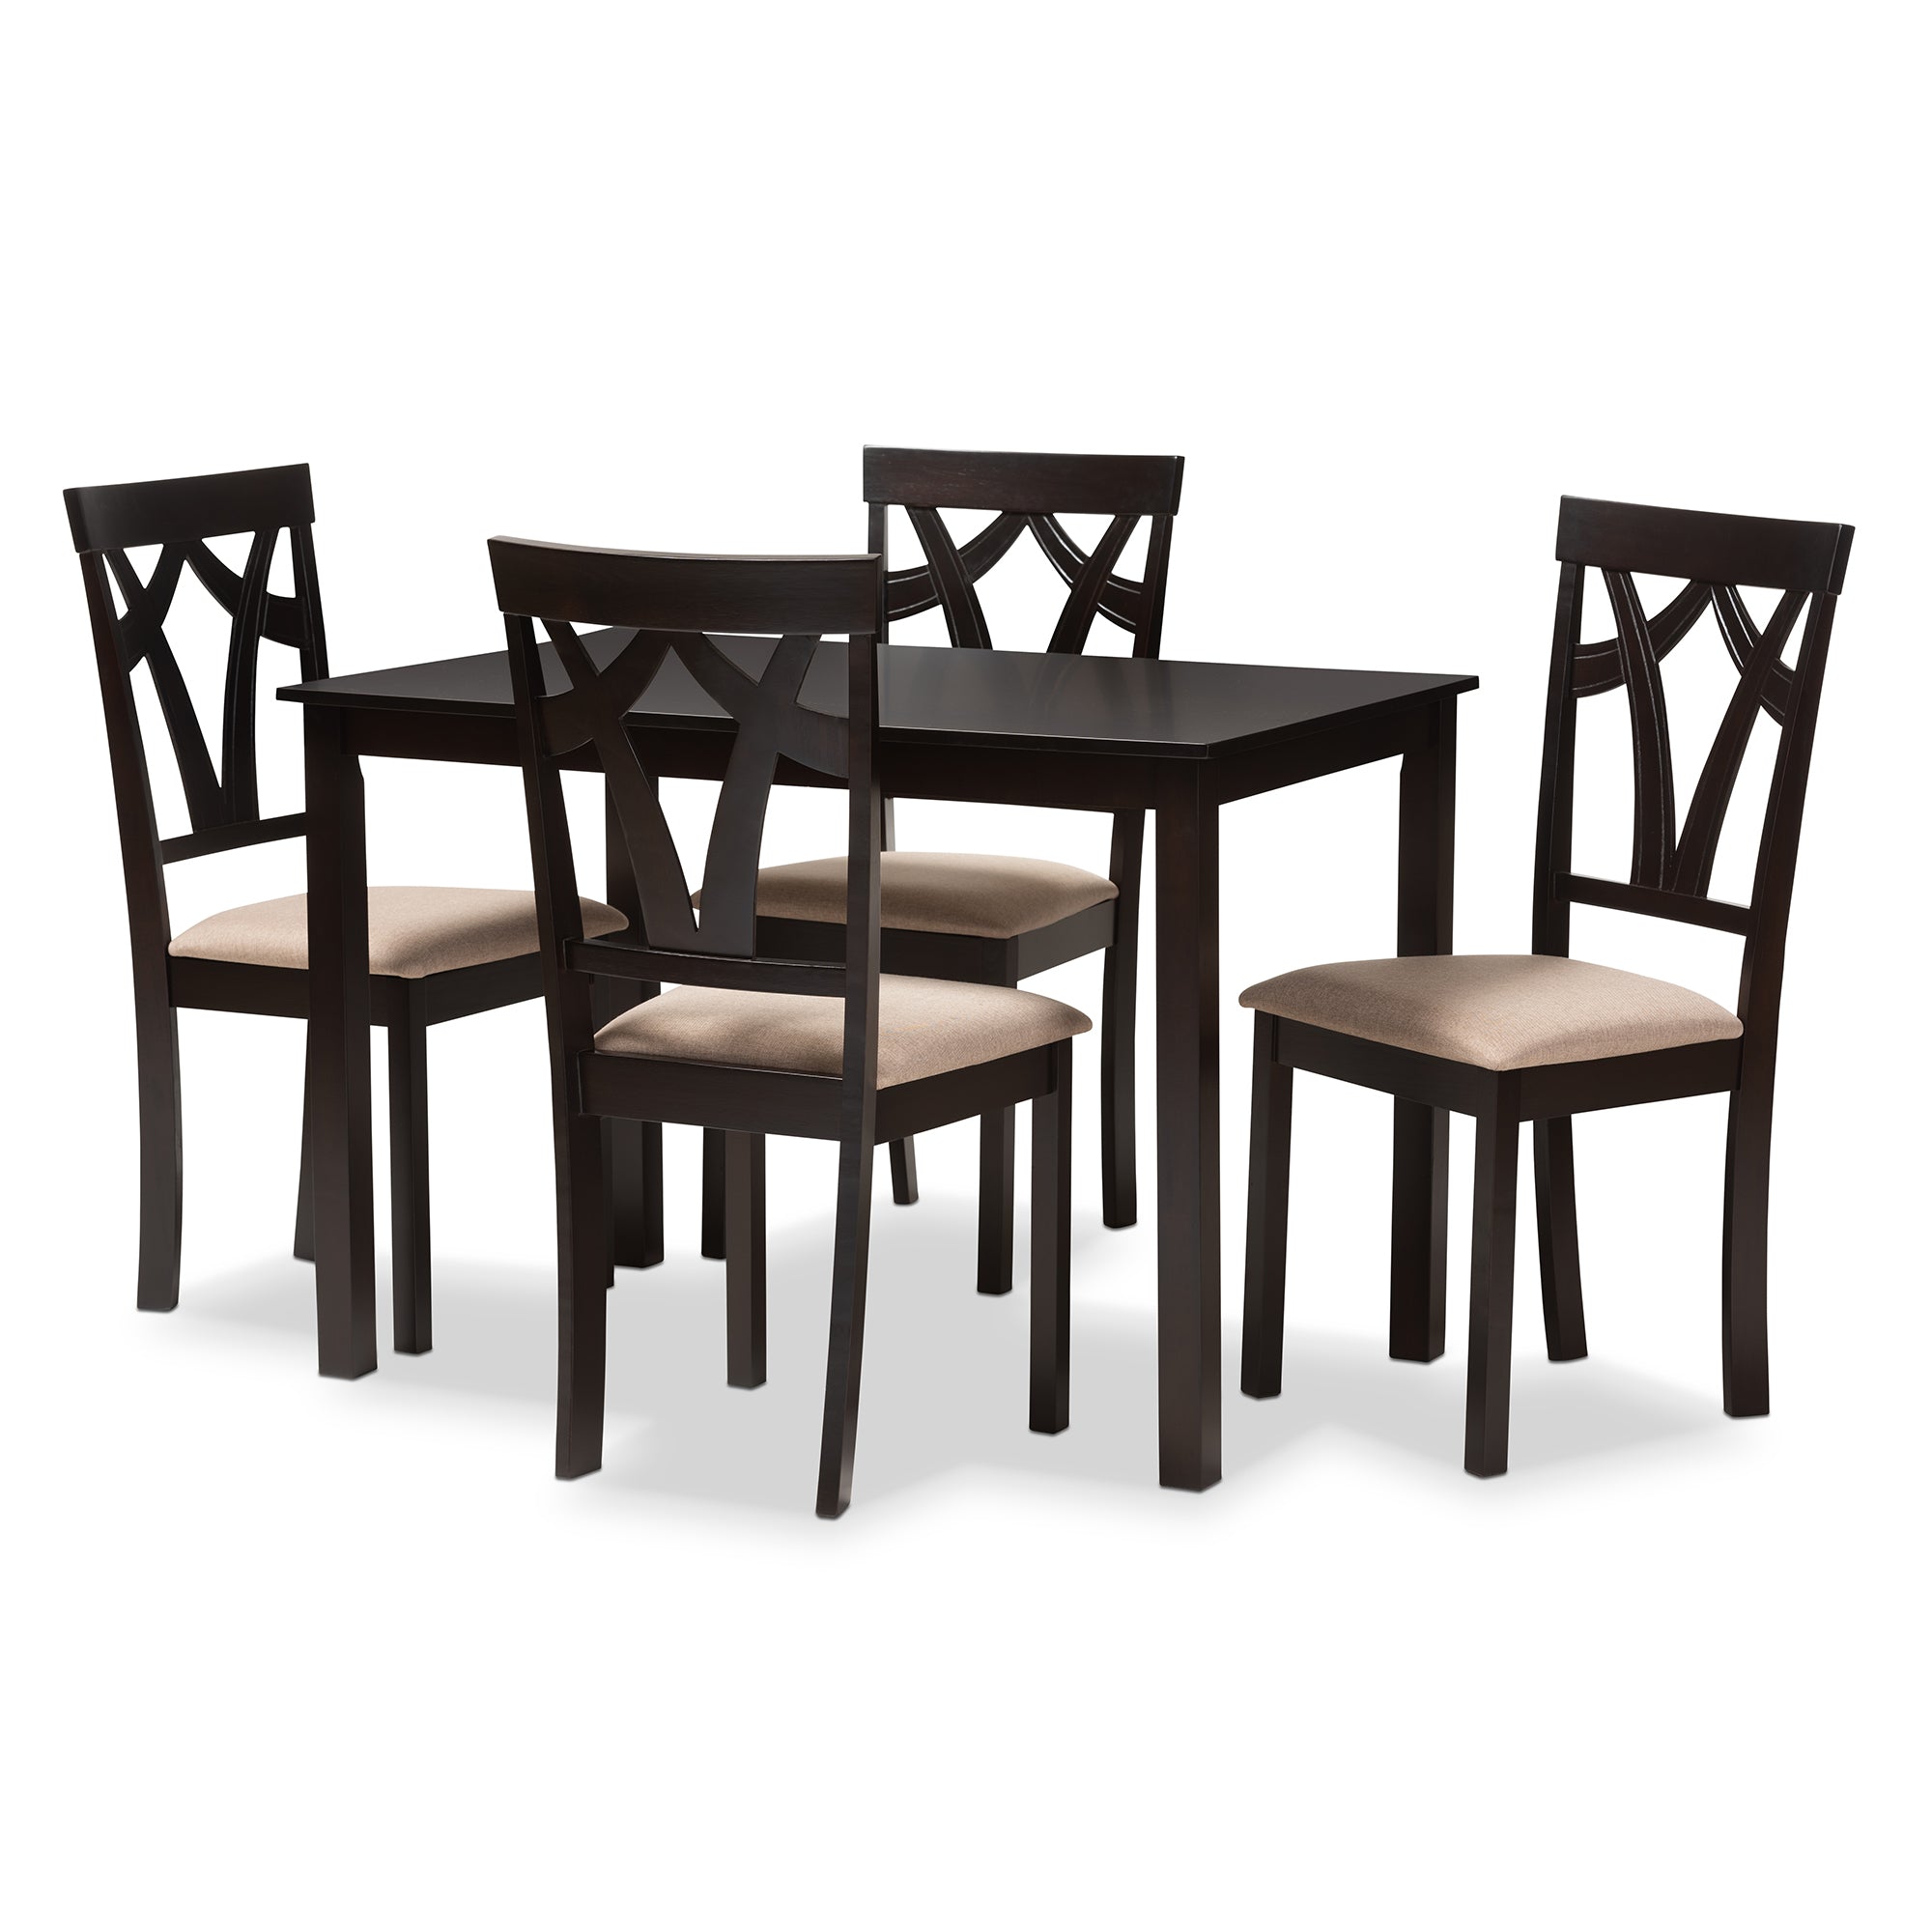 Sylvia Contemporary Dining Table: Dining Chairs 5-Piece-Dining Table: Dining Chairs-Baxton Studio - WI-Wall2Wall Furnishings